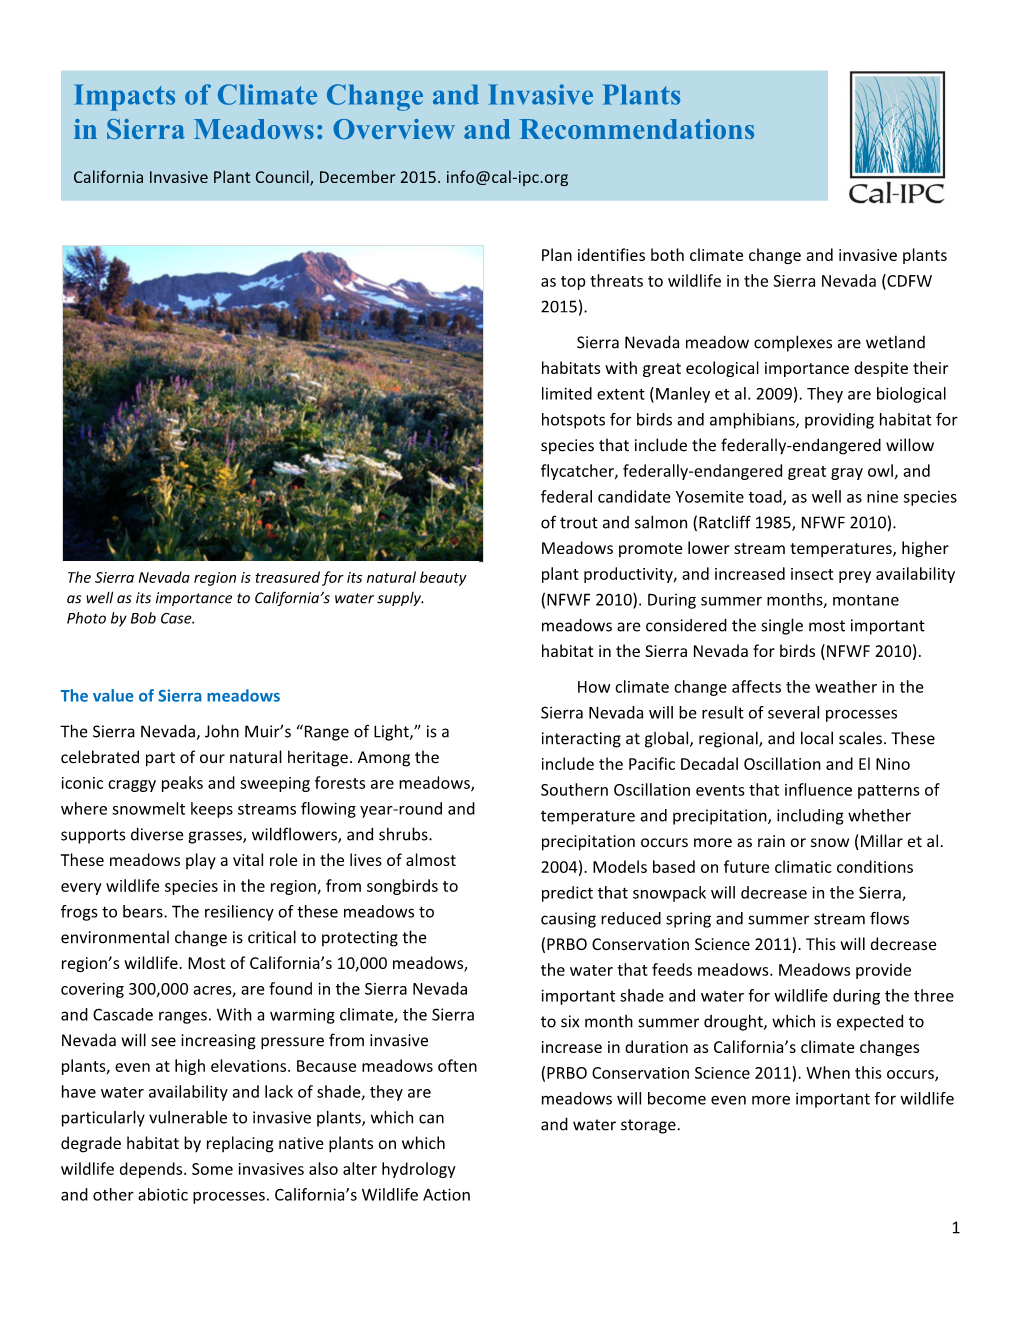 Impacts of Climate Change and Invasive Plants in Sierra Meadows: Overview and Recommendations